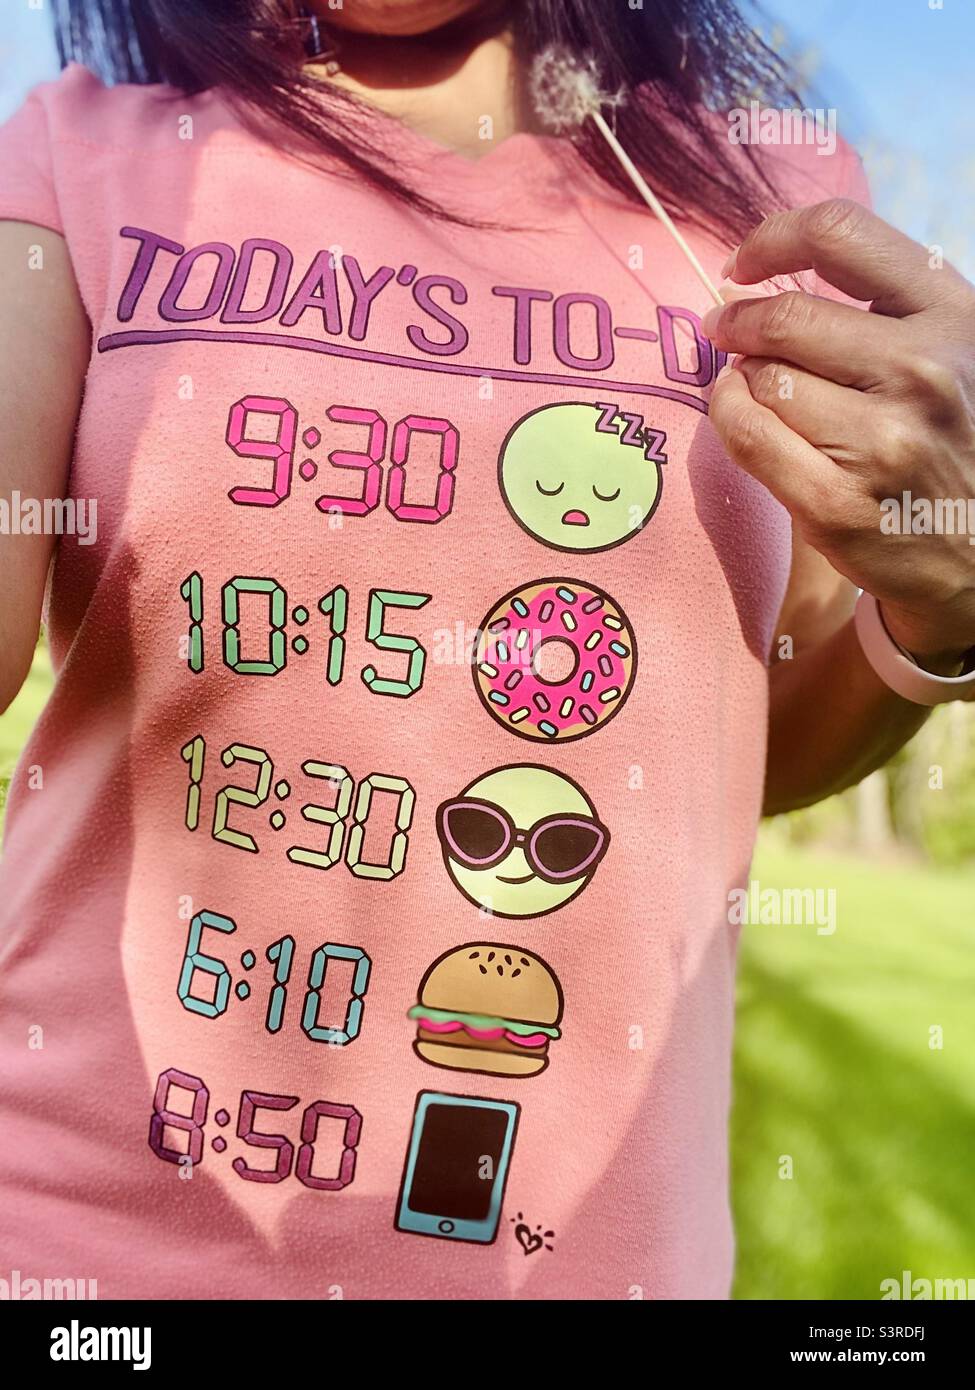 A girl wearing a funny To-Do list TShirt holding a half dandelion poof in her hands. Stock Photo